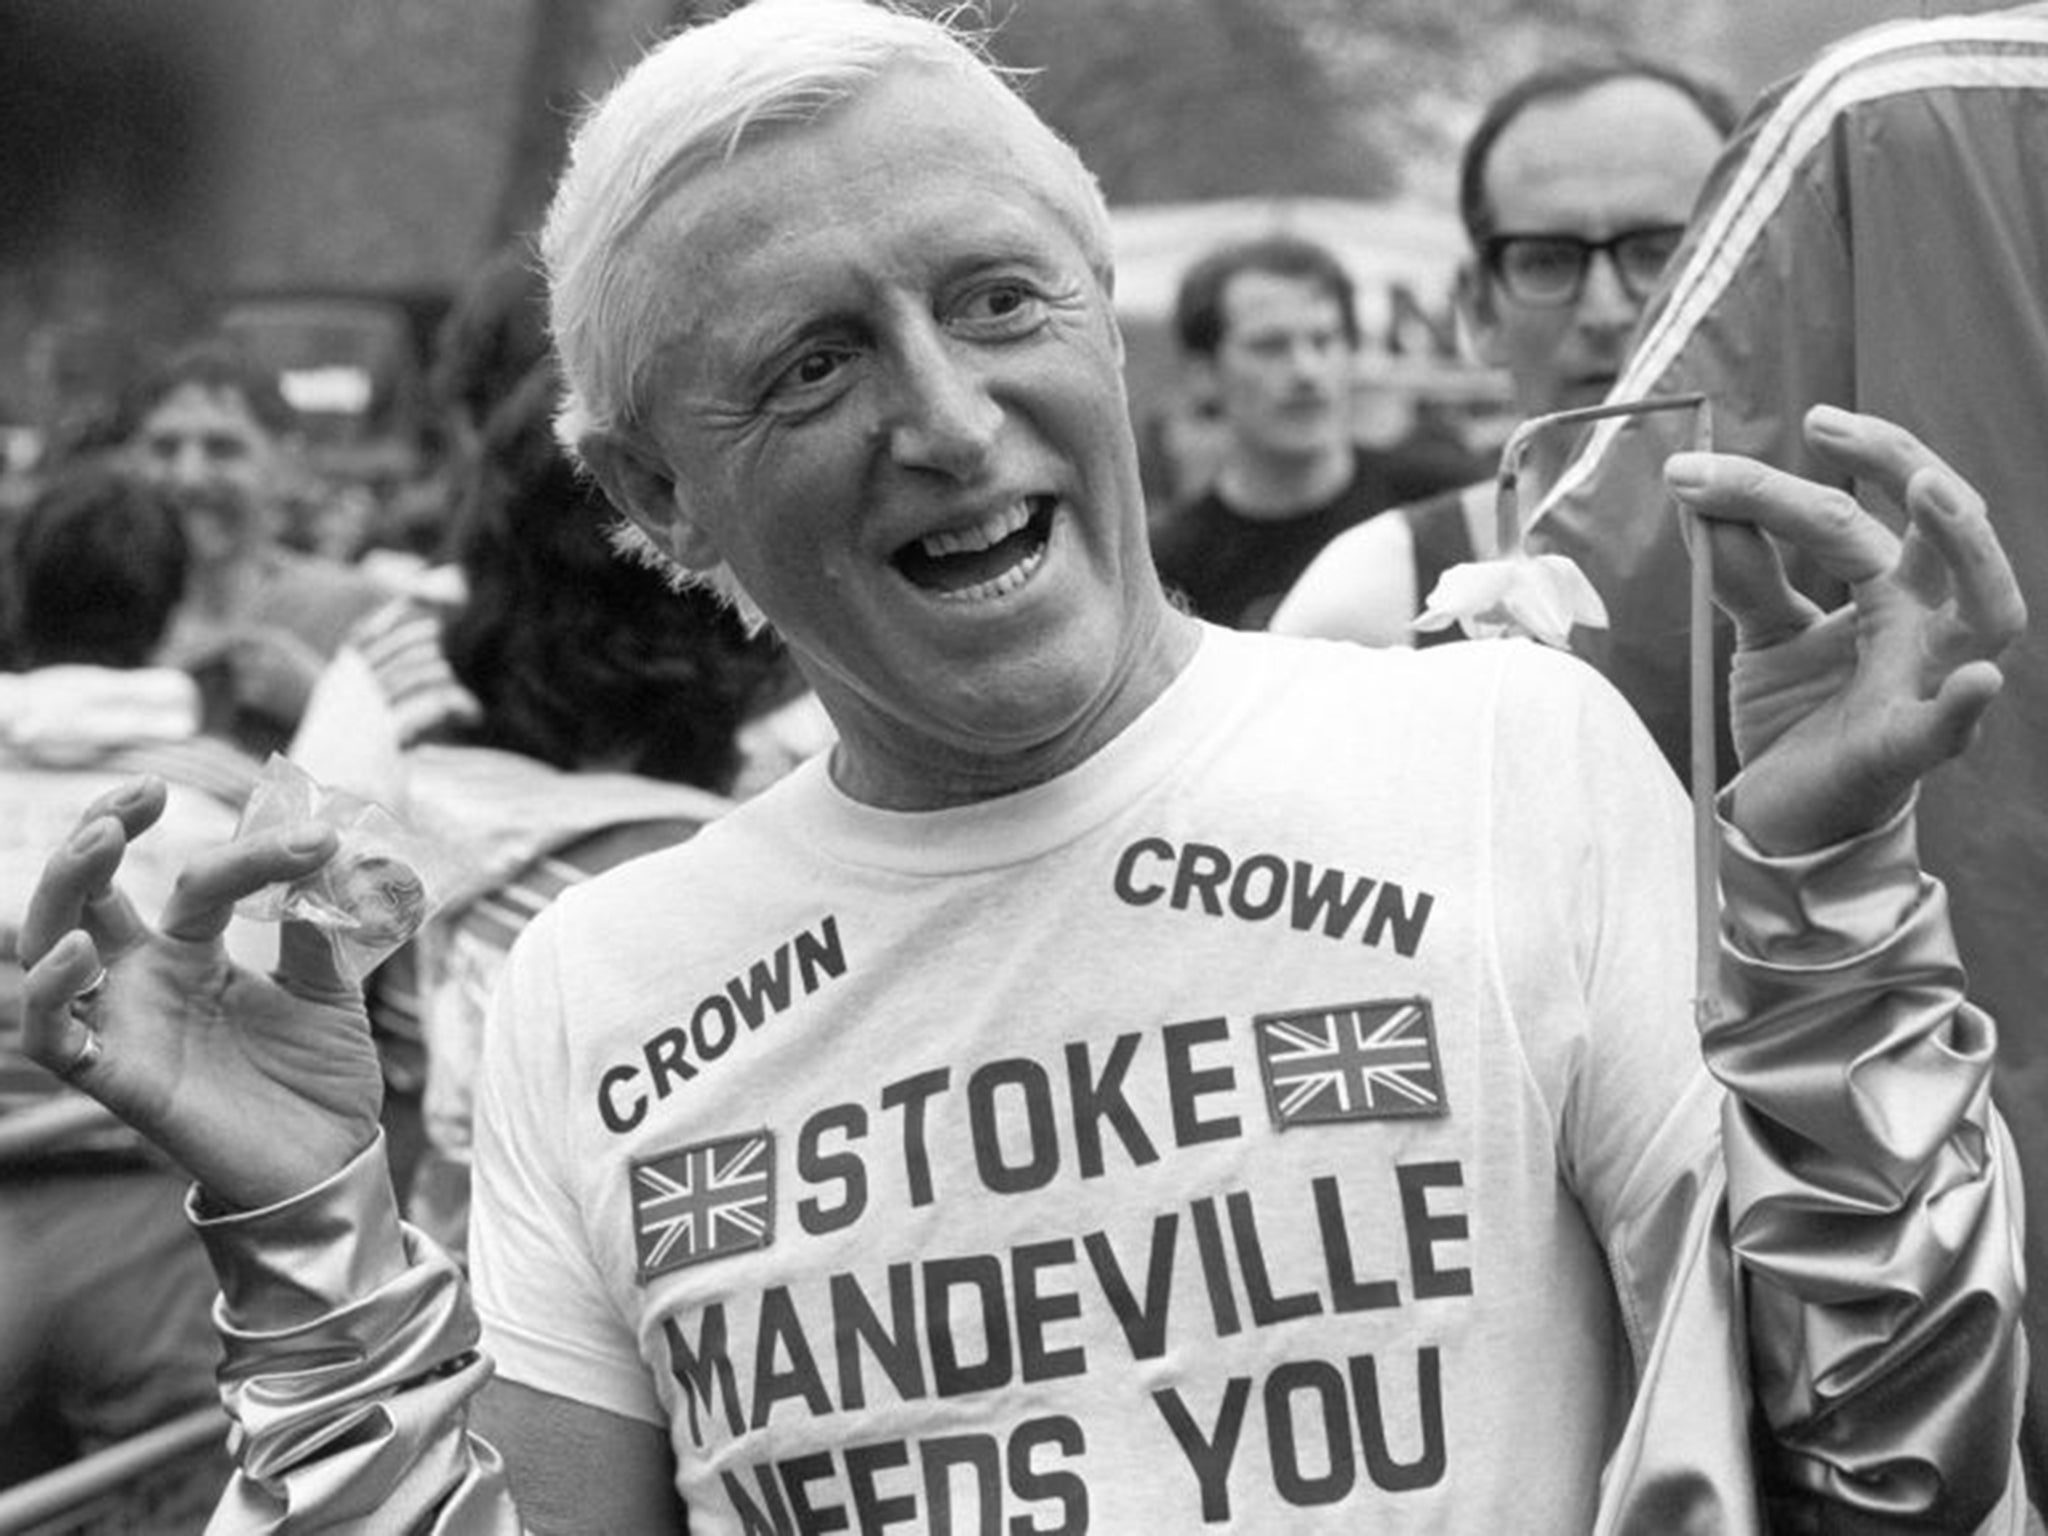 Televsion personality Jimmy Savile was exposed as a depraved paedophile and sexual predator in 2012